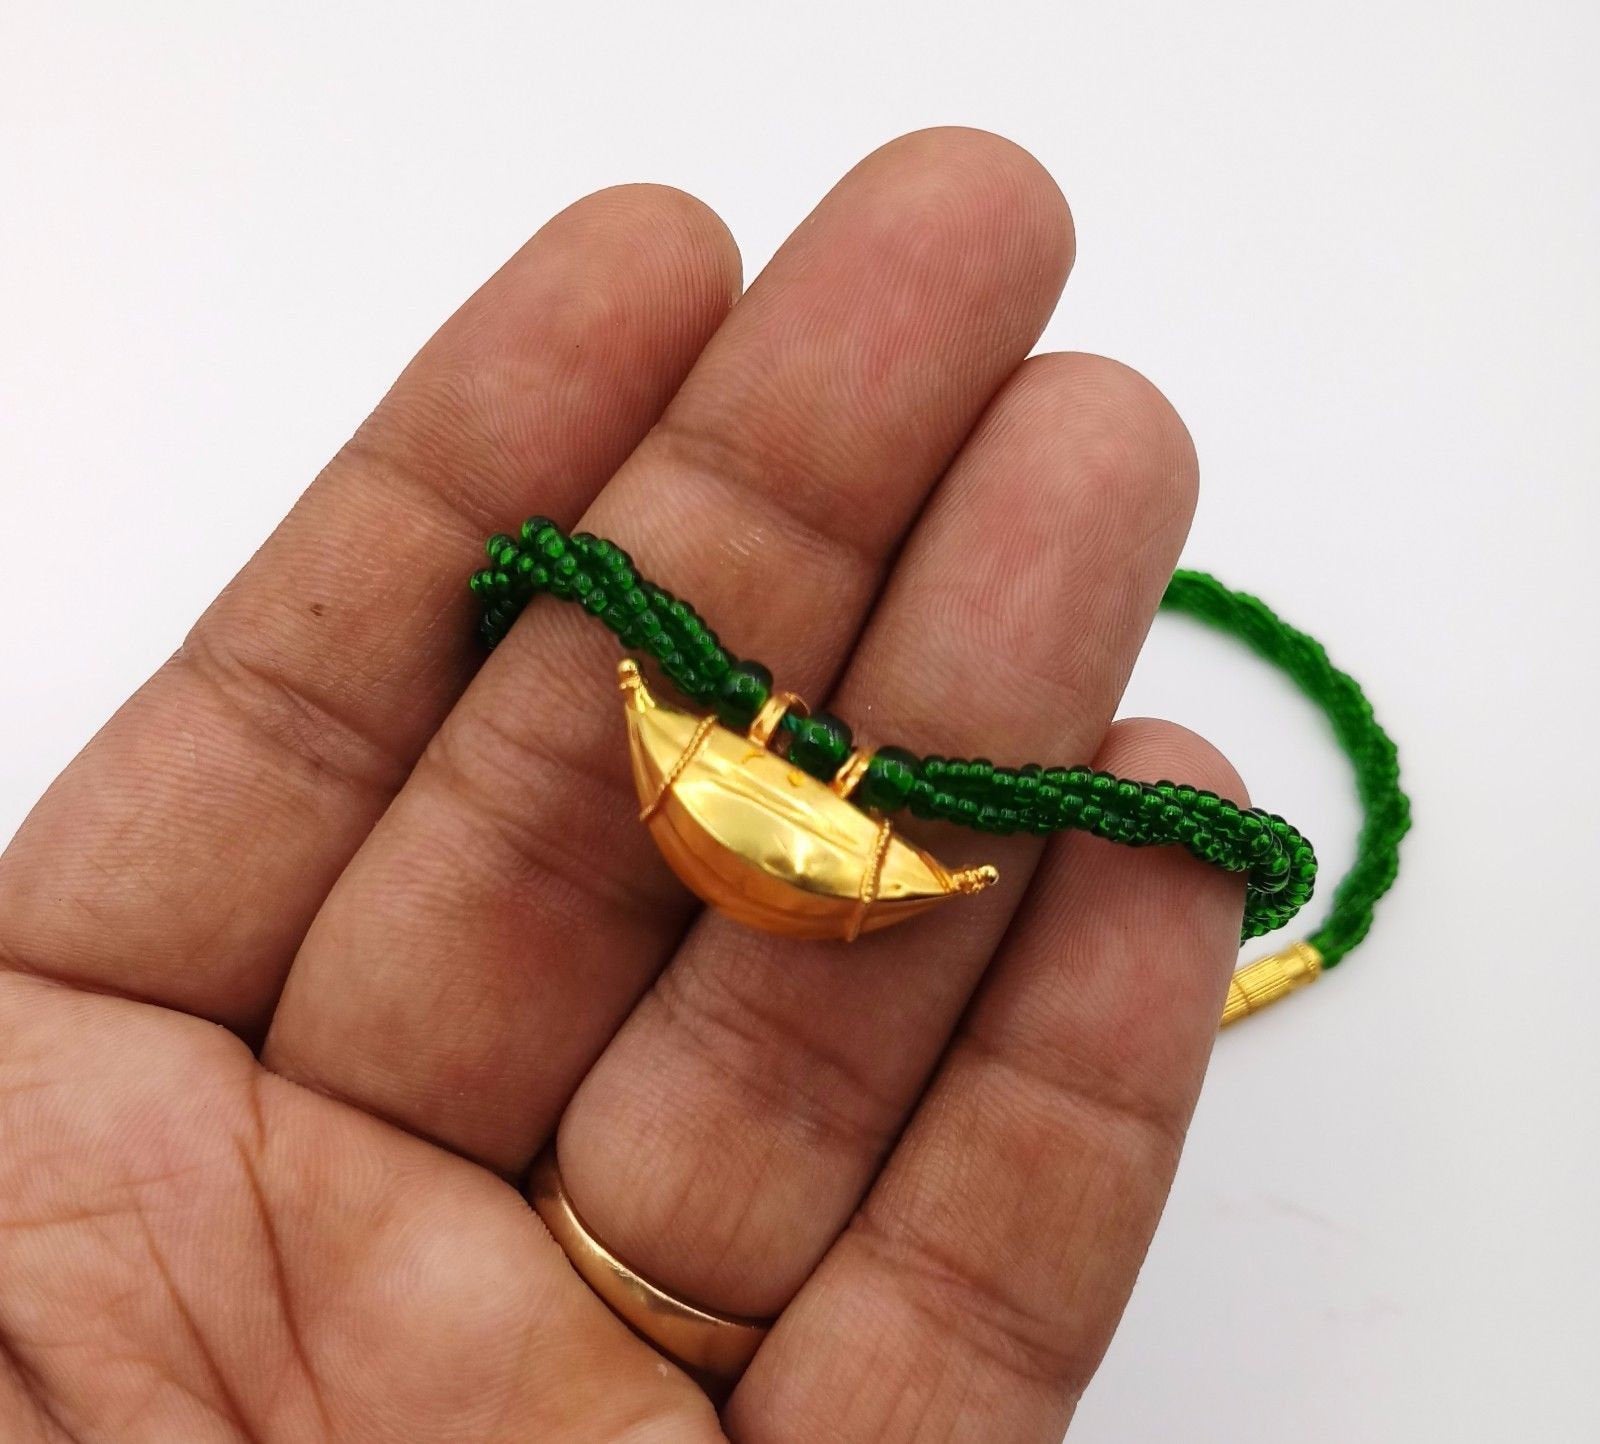 Vintage antique handmade 20k gold amulet pendant from rajasthan india fabulous pendant tribal jewelry with green color stone necklace - TRIBAL ORNAMENTS